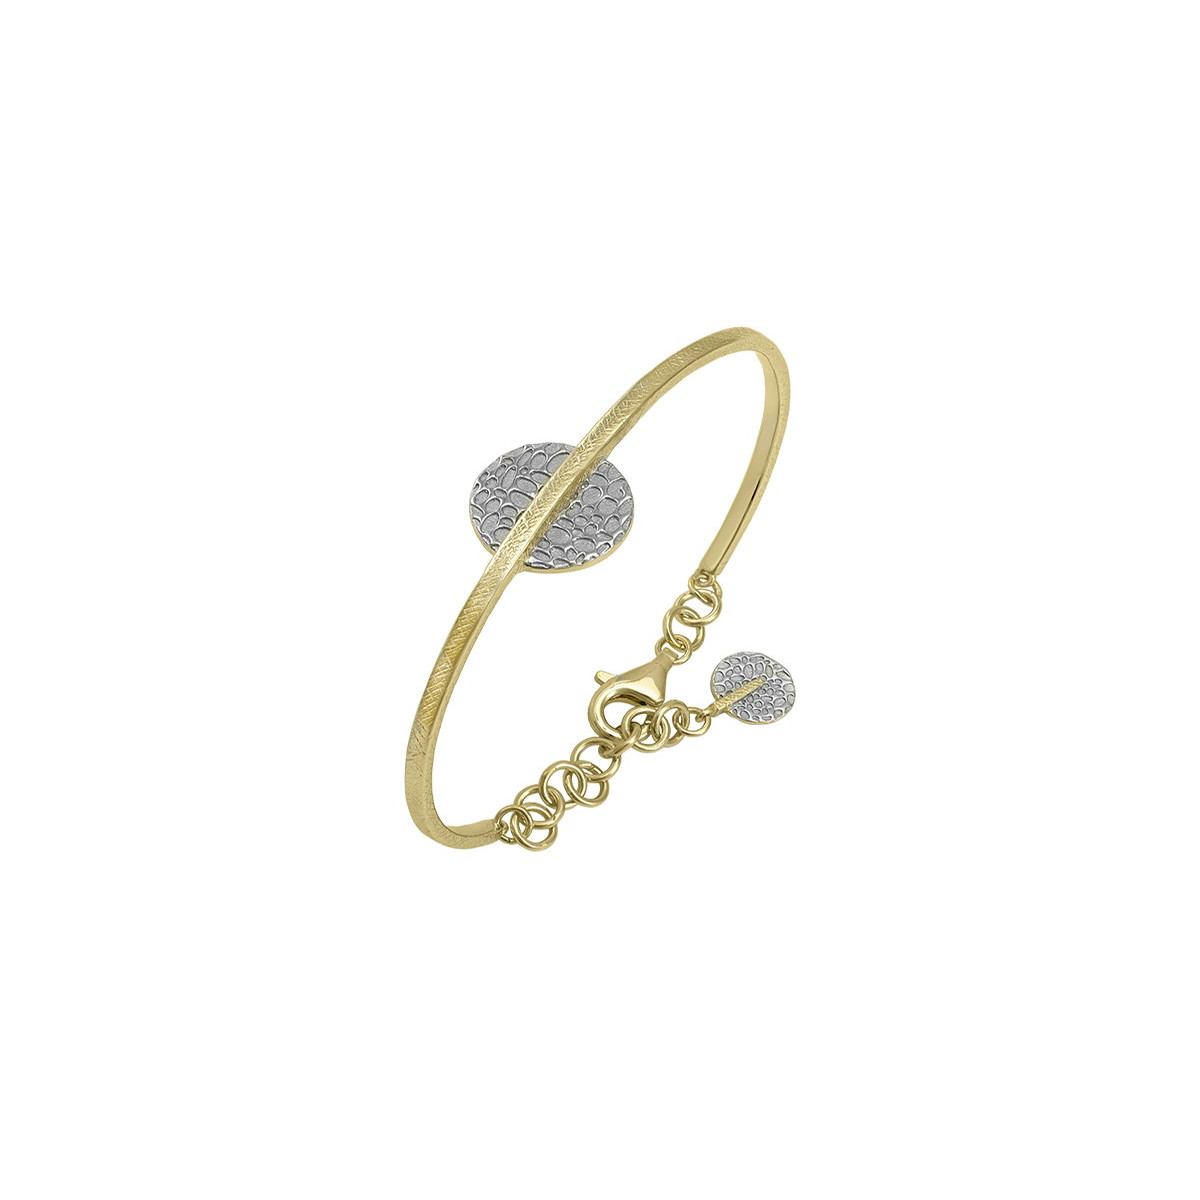 KYMBAL Bangle in Silver. 18k Gold Vermeil